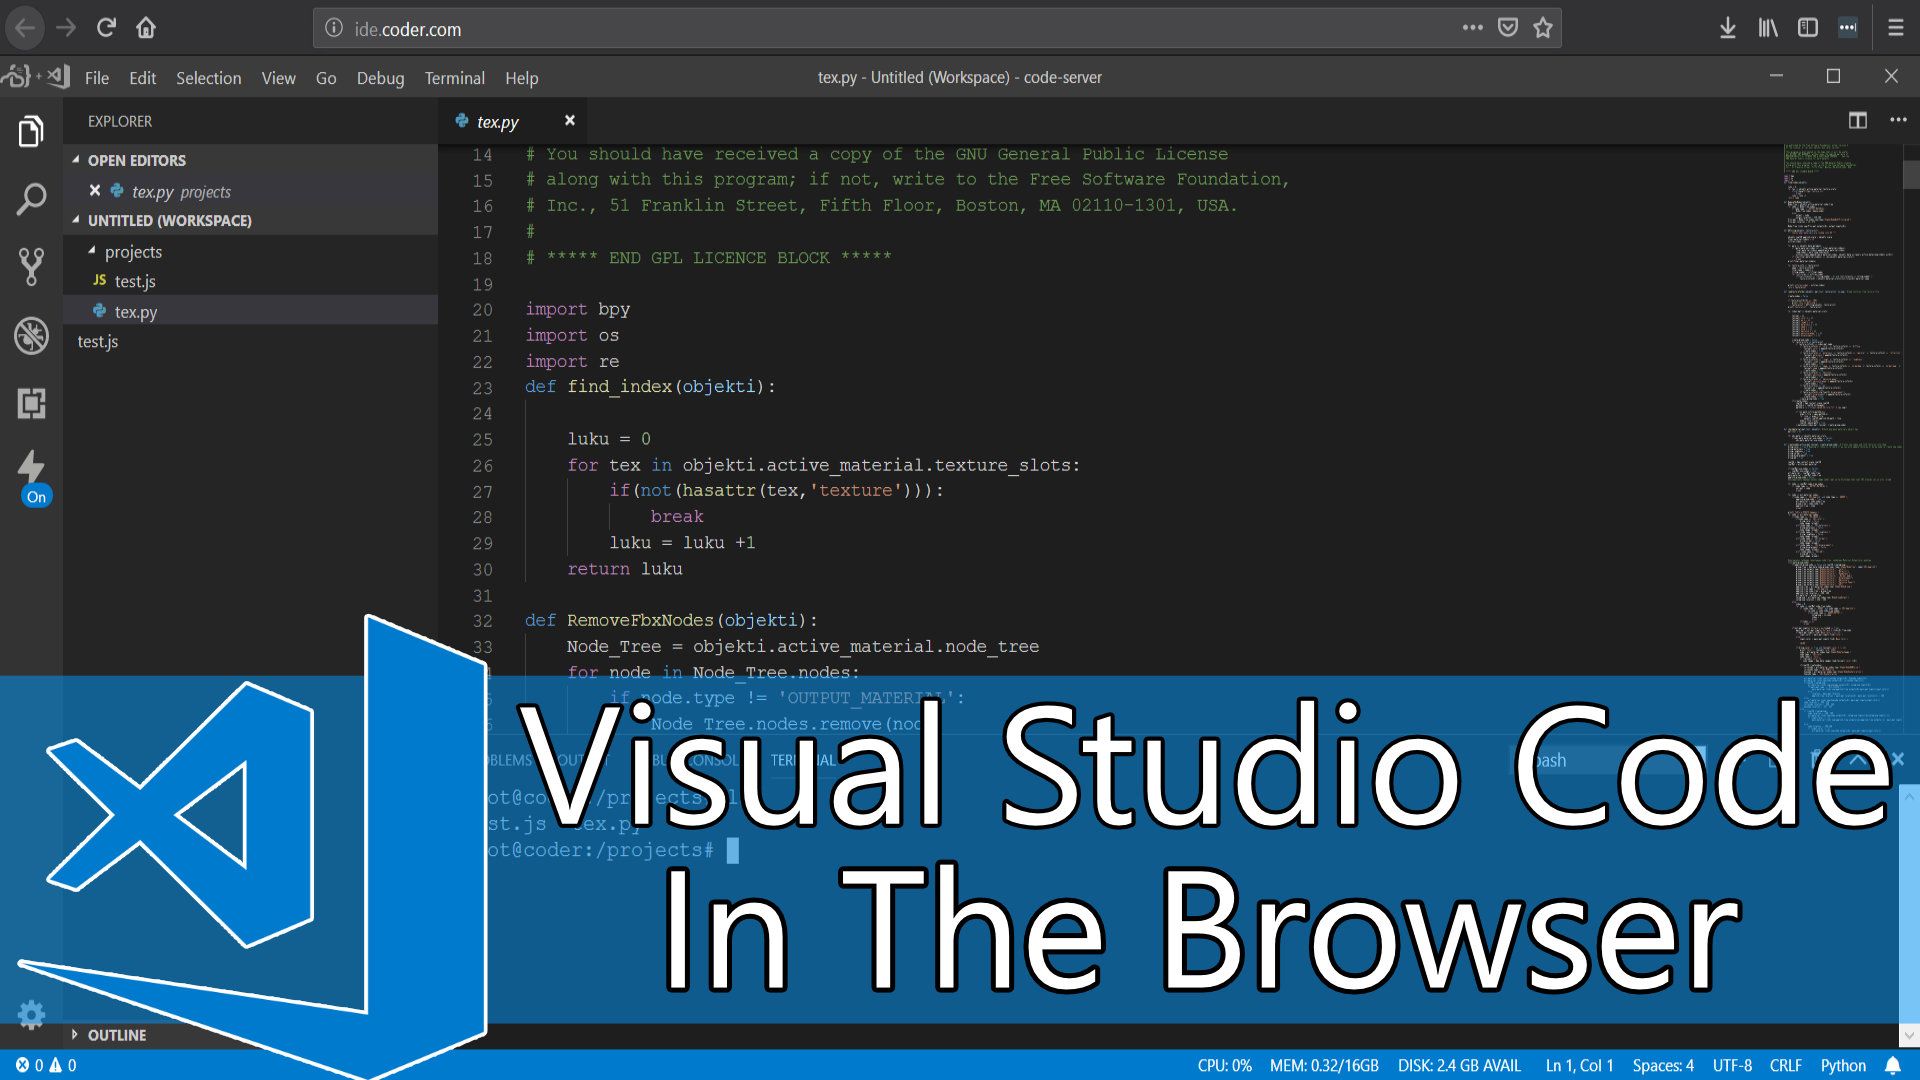 can you download visual studio code on chromebook